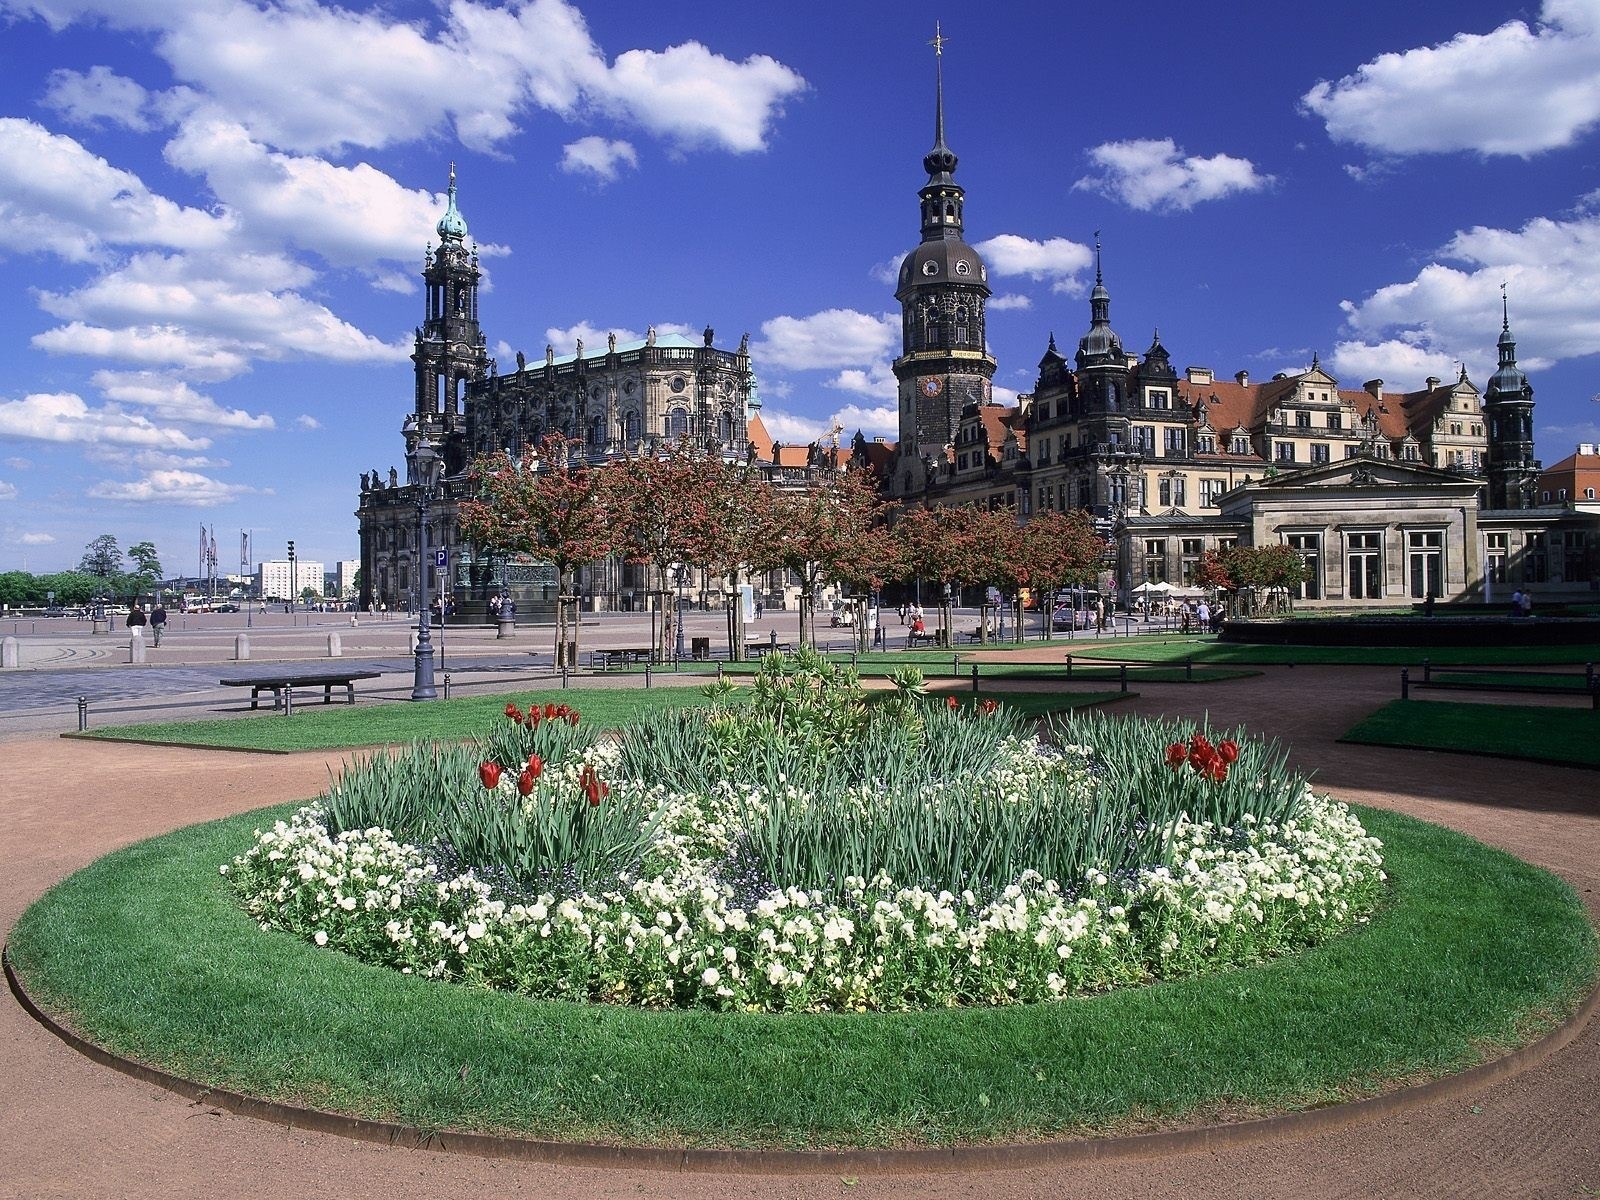 General 1600x1200 architecture Dresden Germany cityscape clouds flowers urban